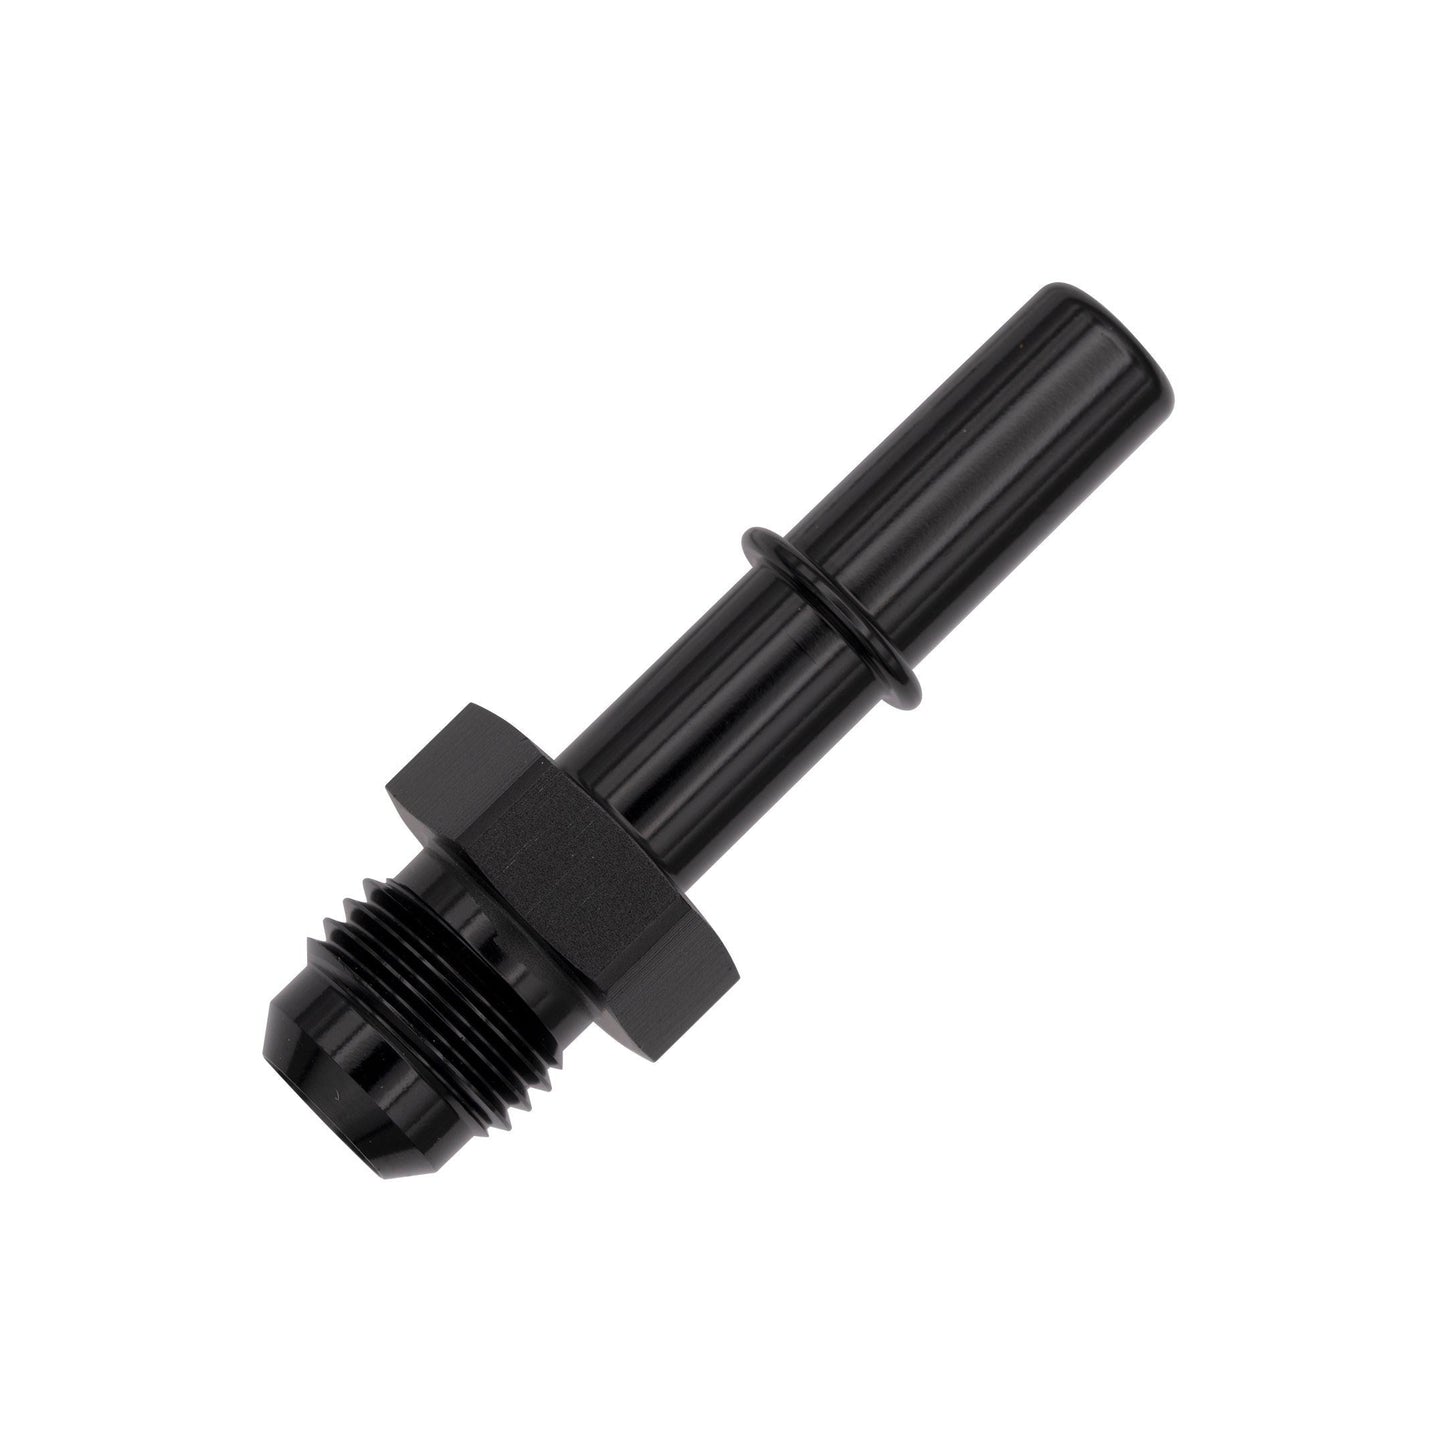 6AN x 5/16" Spring Lock Fuel Adapter - Male/Male